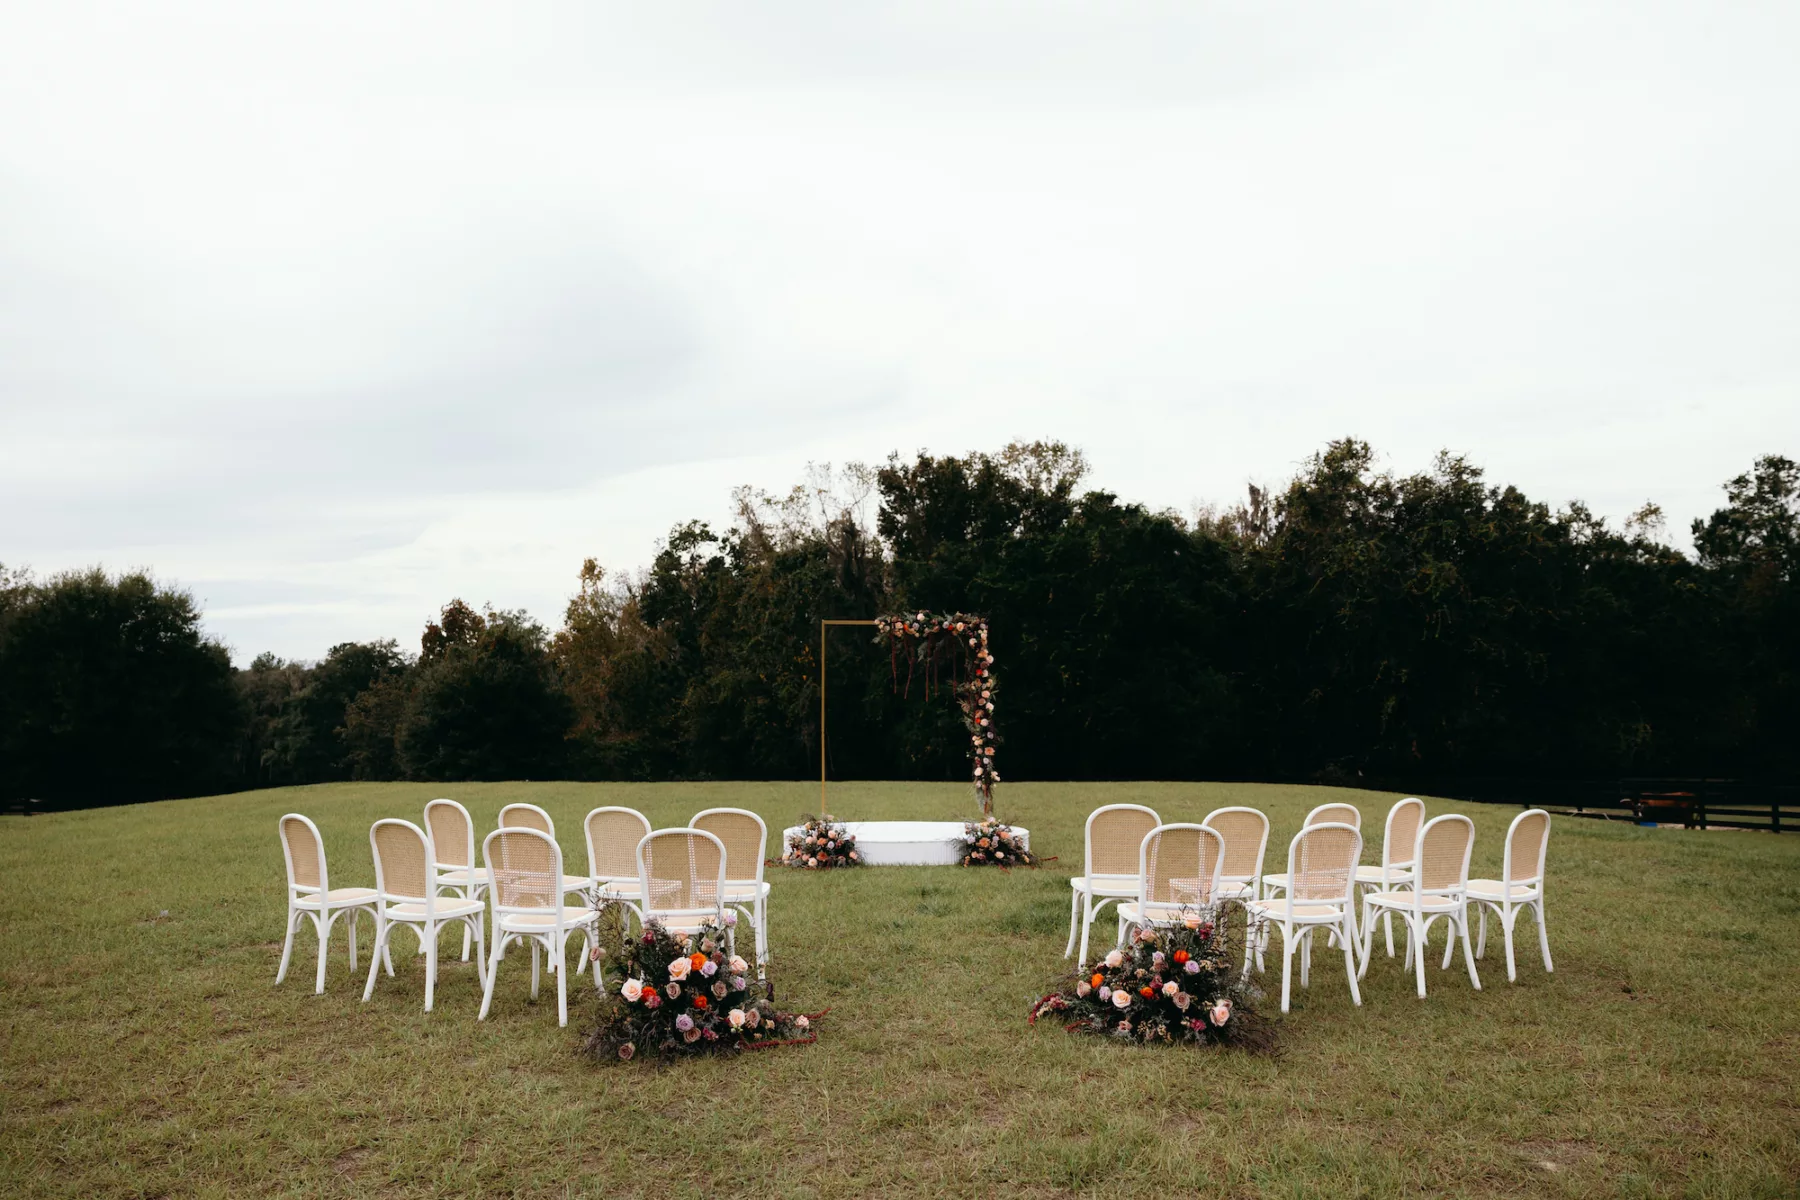 Moody Purple and Peach Whimsical Outdoor Field Fall Wedding Ceremony Inspiration | White and Rattan Chair Ideas | Pink, Orange, Purple, and White Roses, Amaranthus, and Greenery Aisle Decor | Tampa Bay Event Venue La Hacienda At Snow Hill | Planner MDP Events | Florist Save The Date Florida